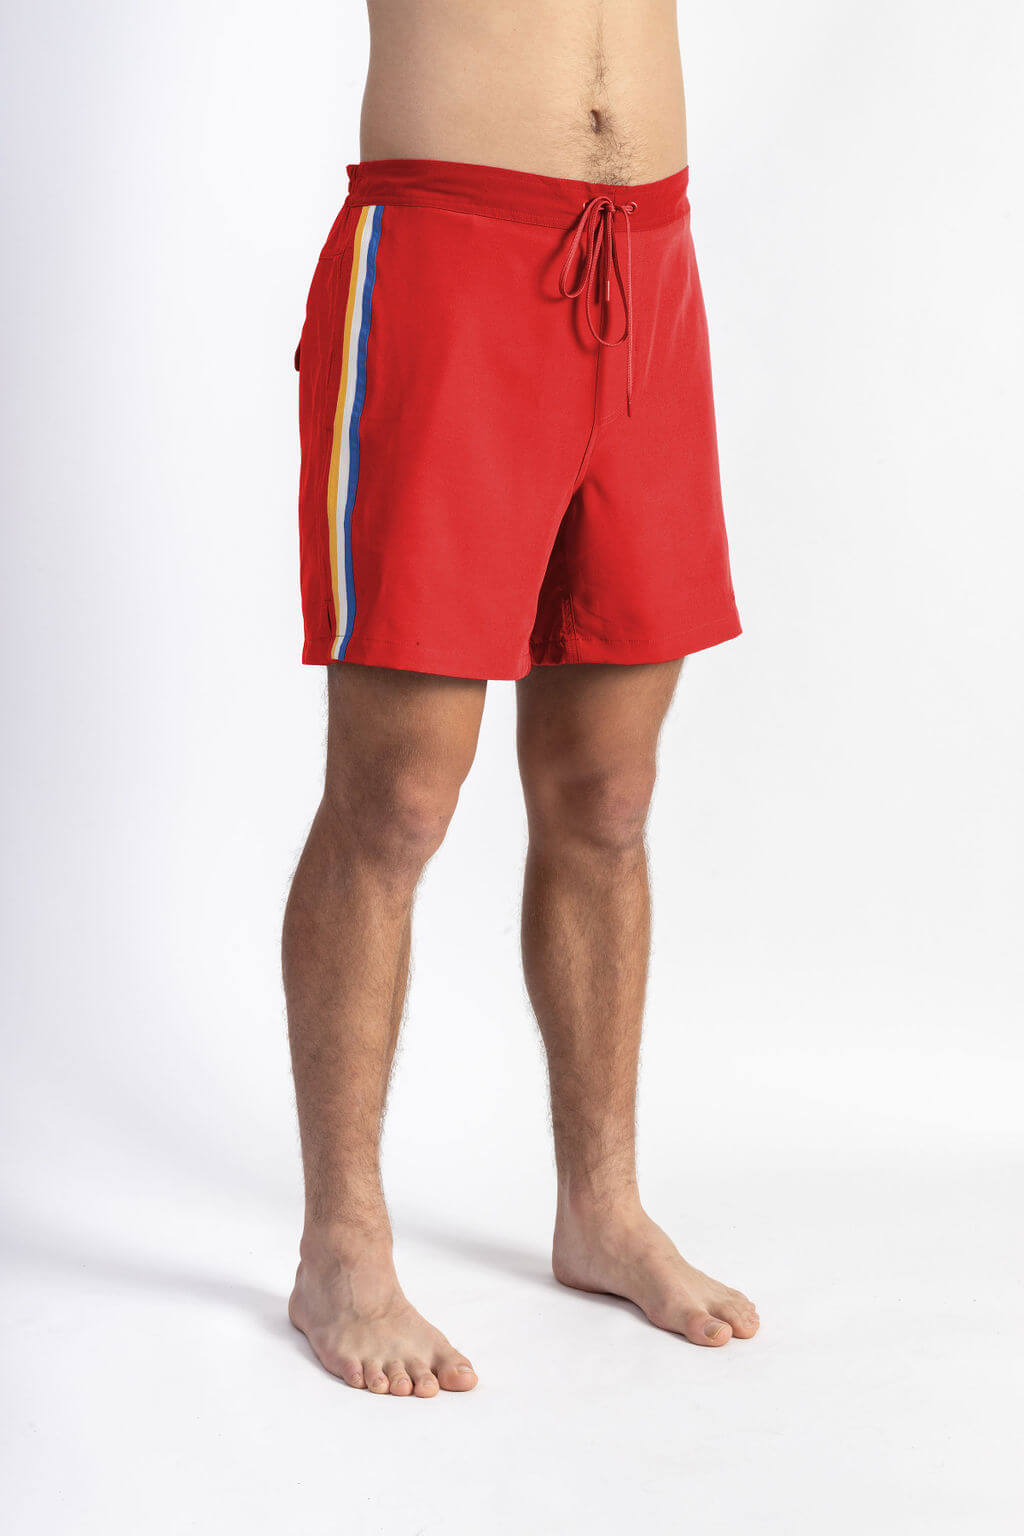 A picture of man wearing shorts